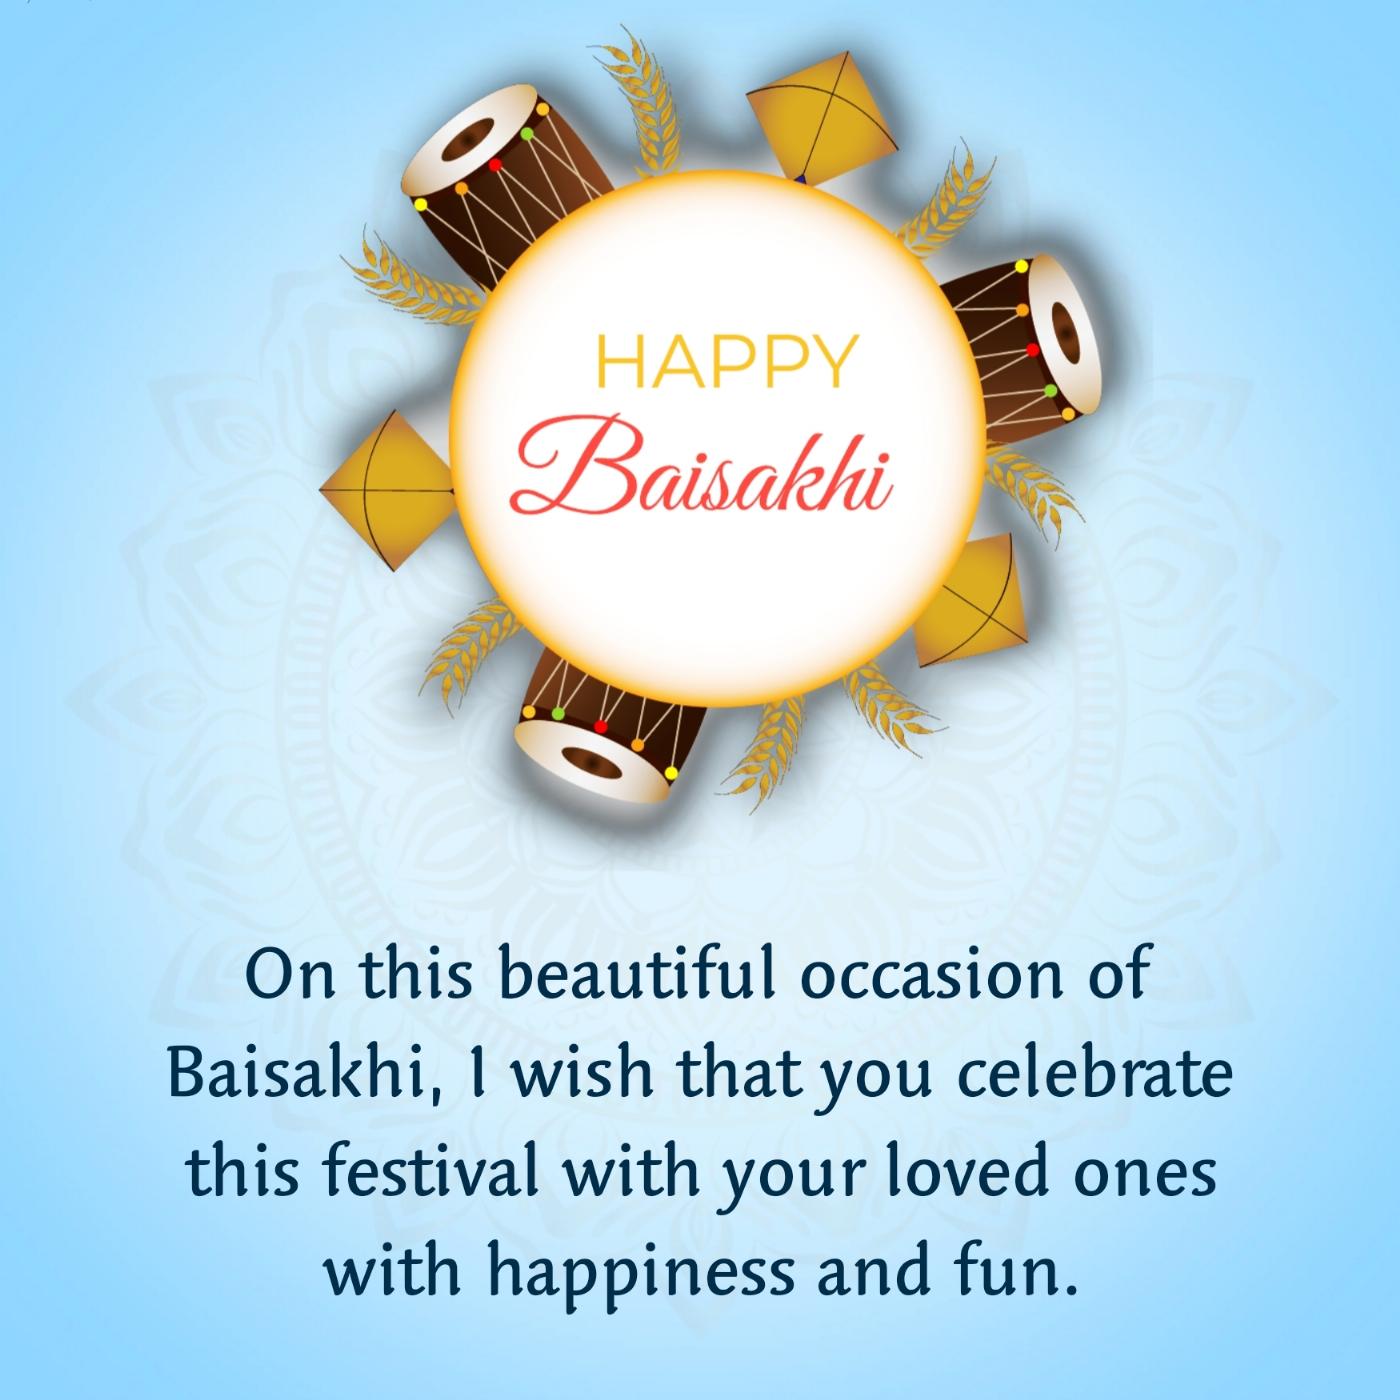 On this beautiful occasion of Baisakhi I wish that you celebrate